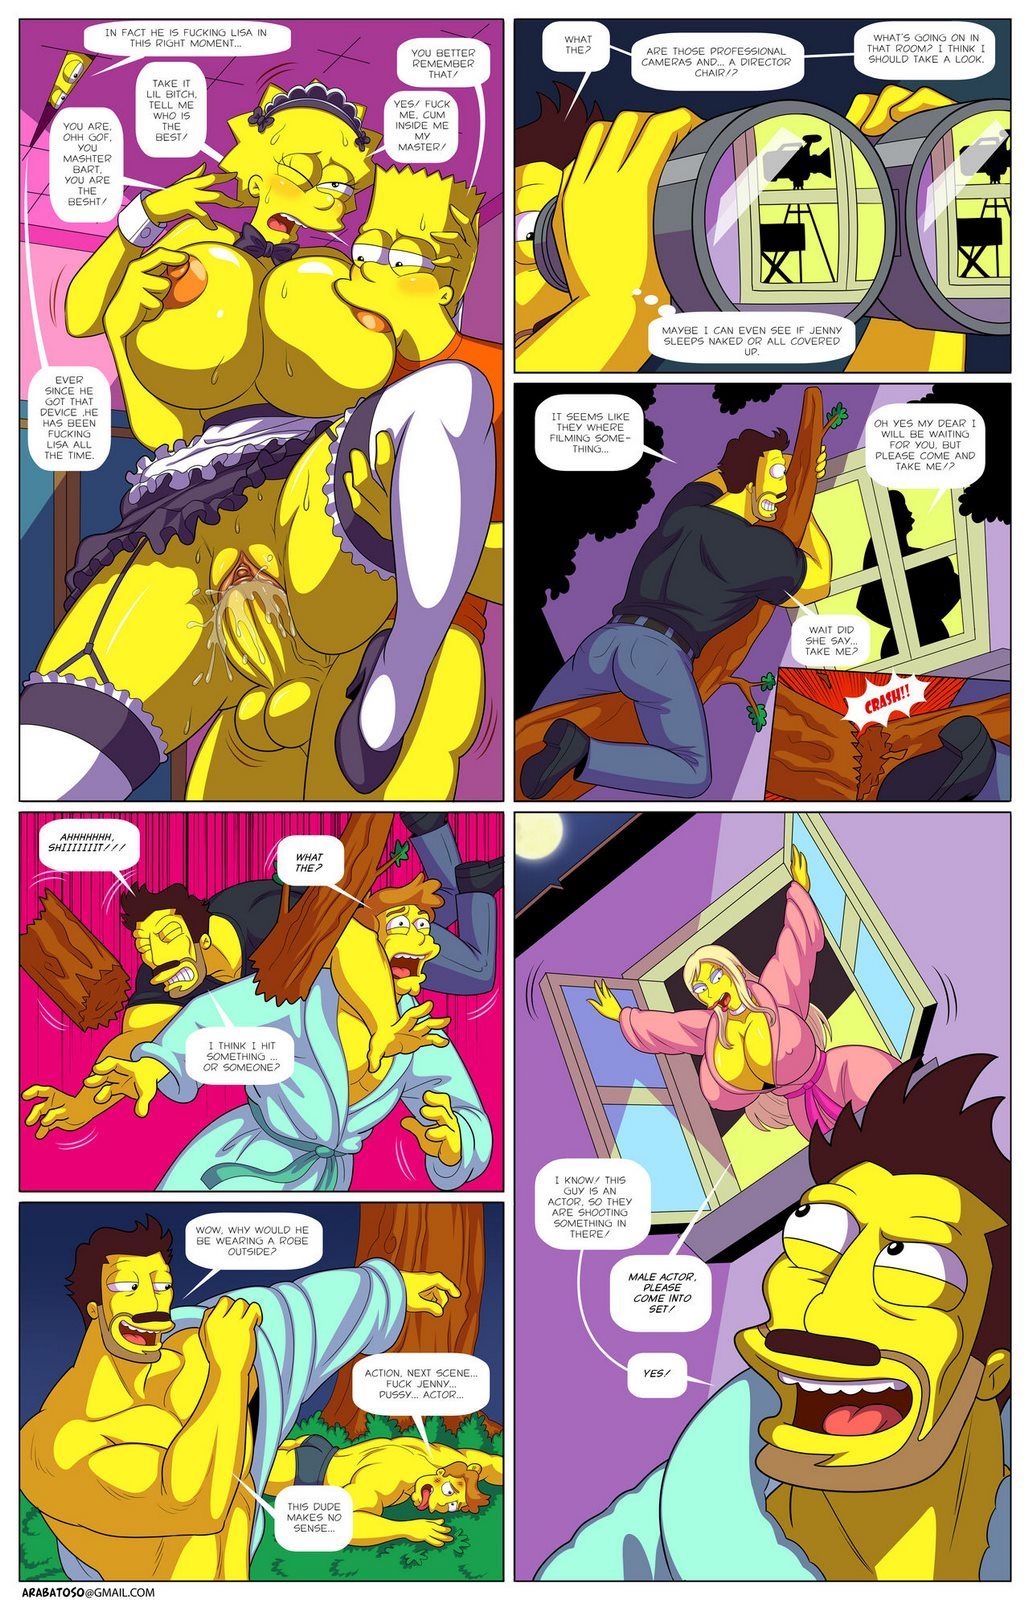 Darrens Adventure - Jenny Poussins Chapter page 2